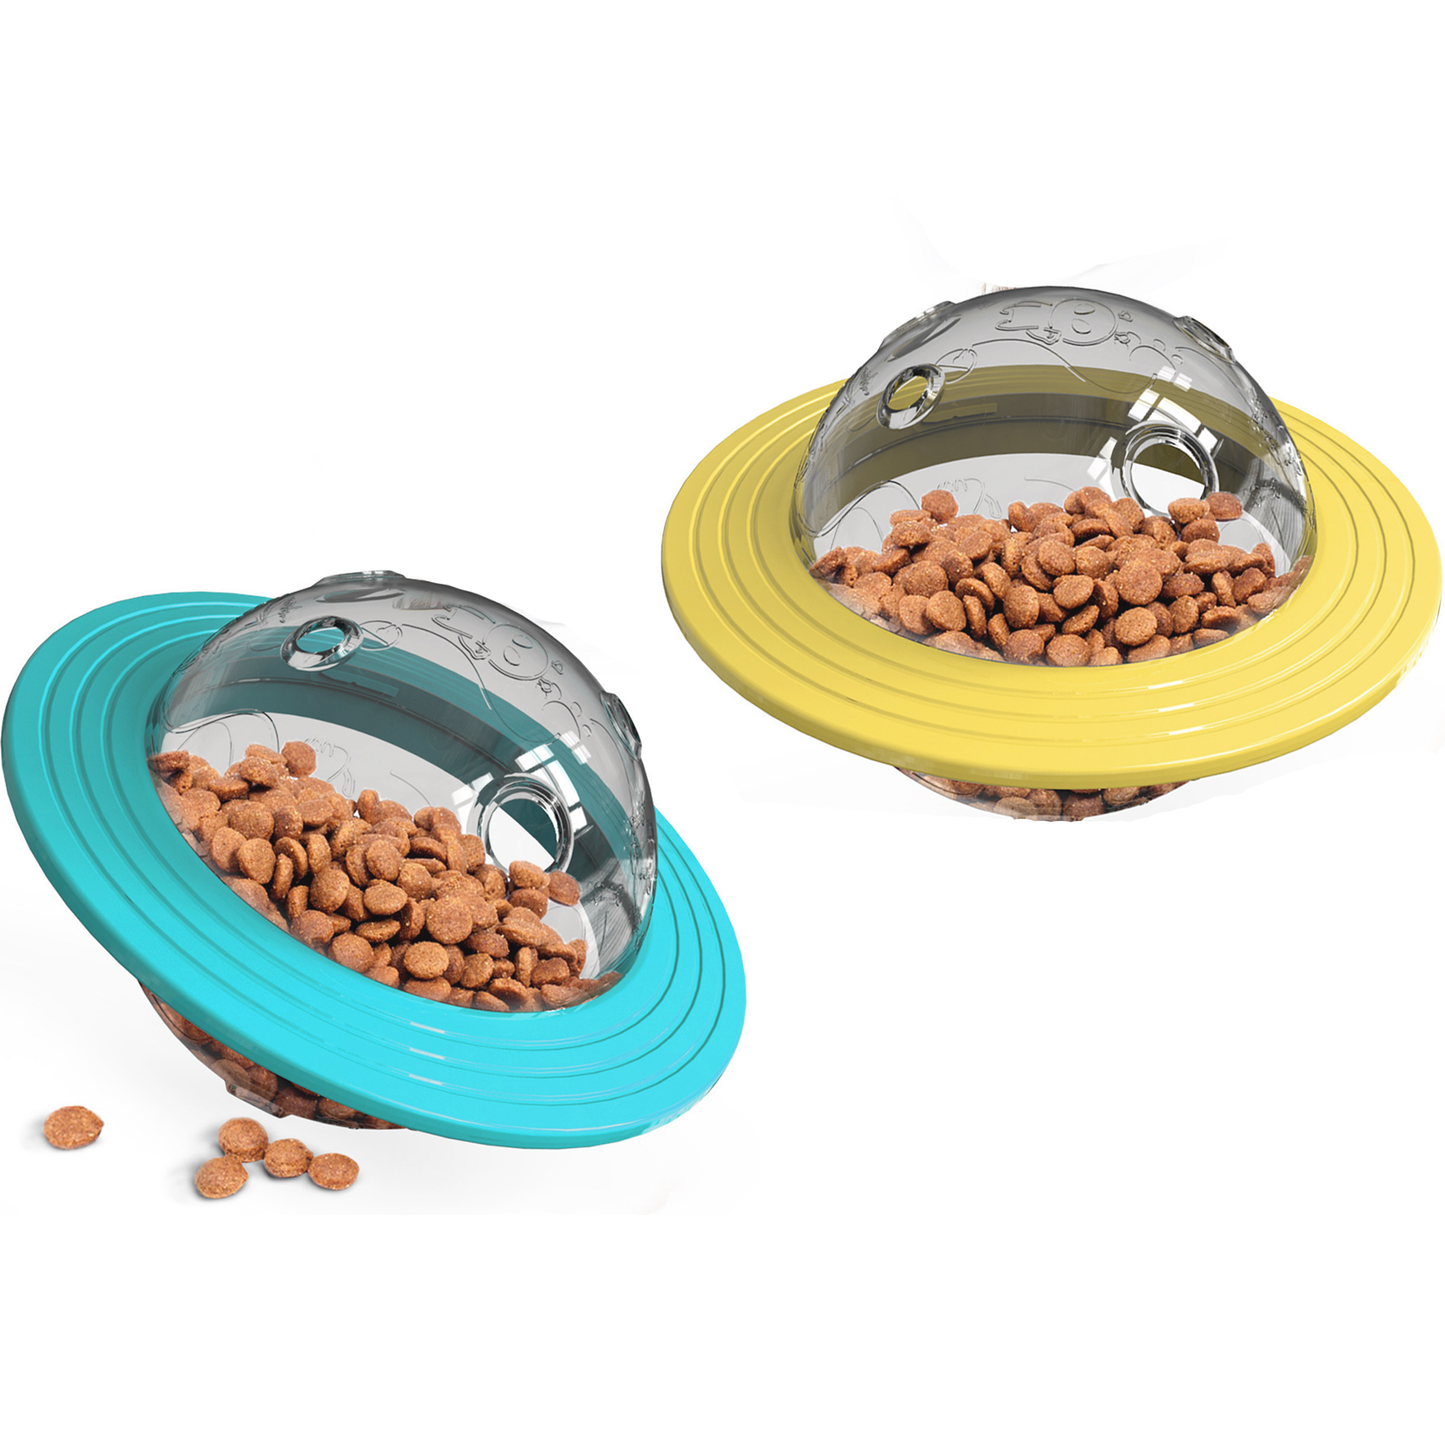 Space Interactive Toy for Treat Storage